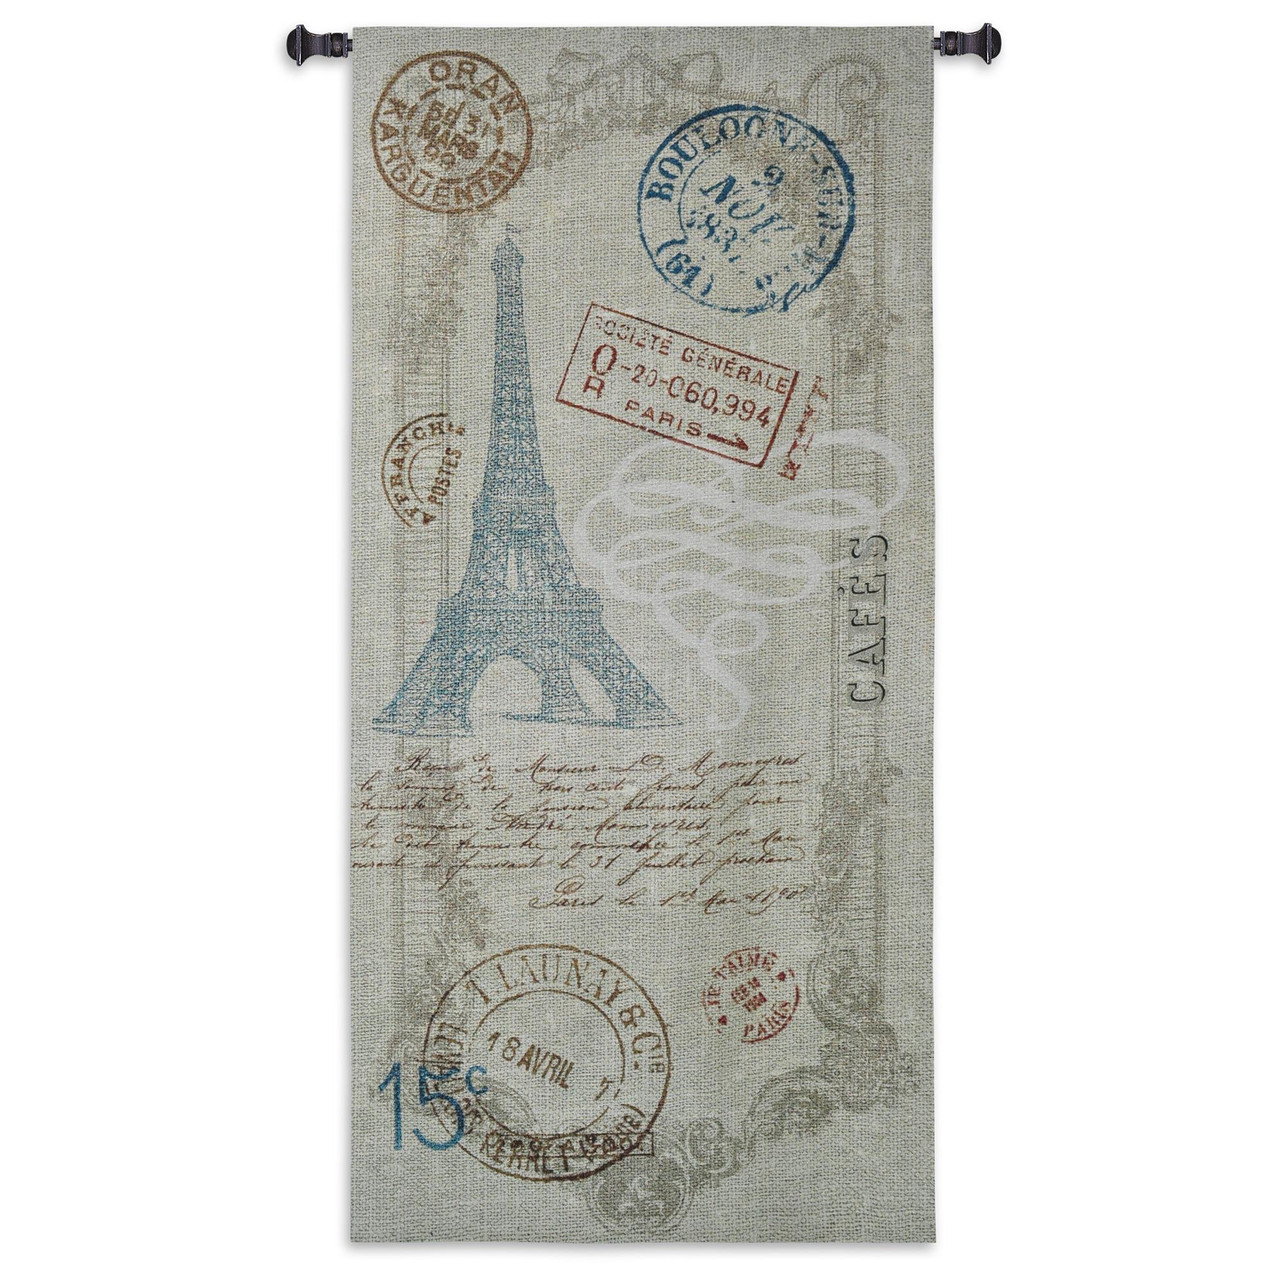 Paris Metro Woven Tapestry Wall Art Hanging Vintage French Travel Artwork With Eiffel Tower And Luggage Labels 100 Cotton Usa Size 64x31